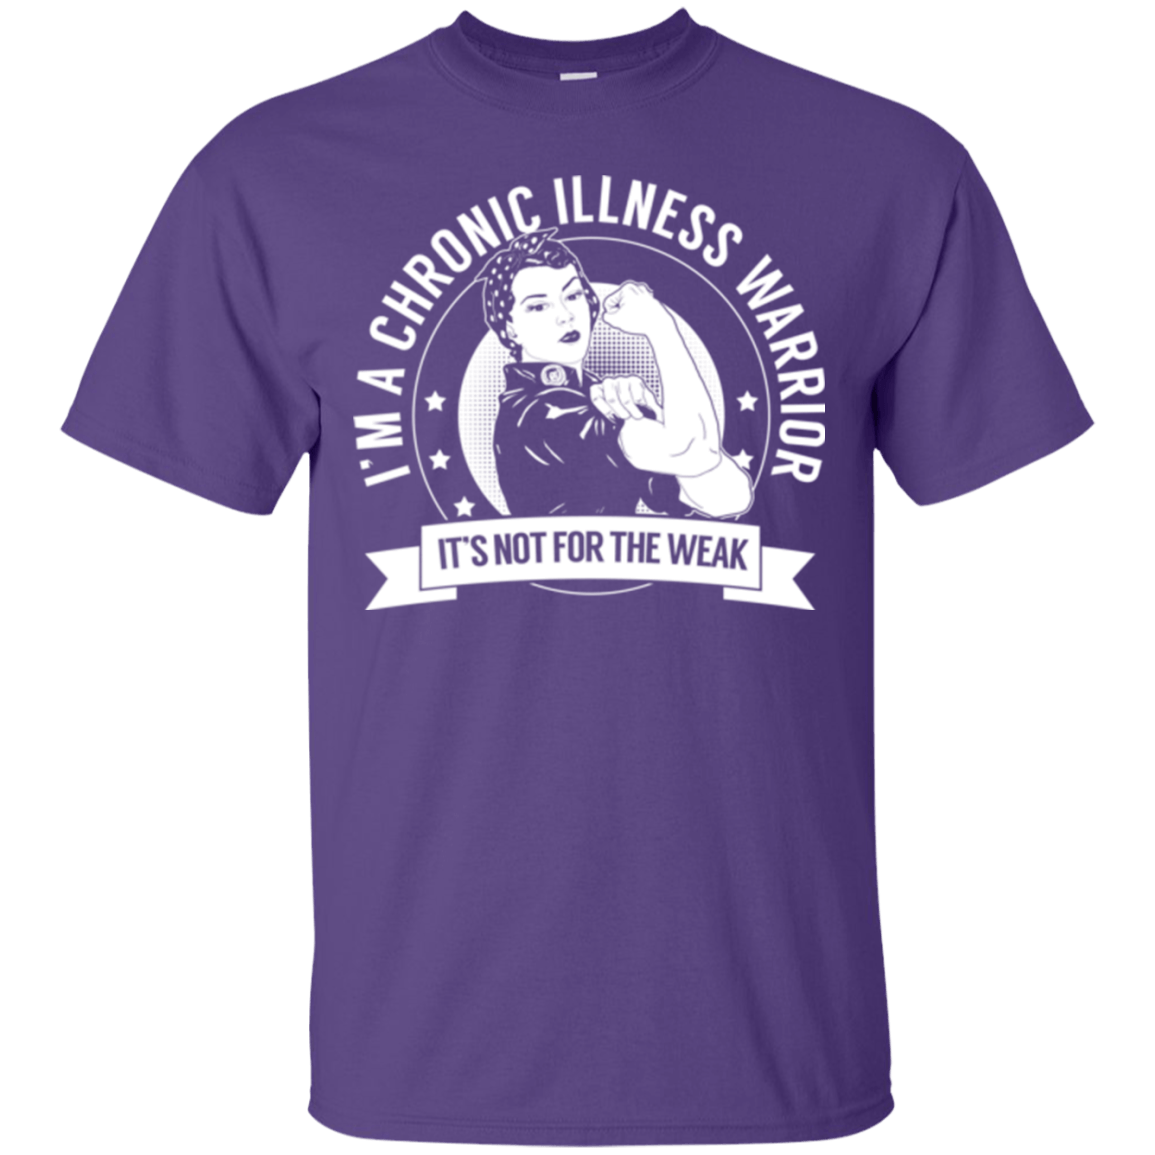 Chronic Illness Warrior Not For The Weak Unisex Shirt - The Unchargeables